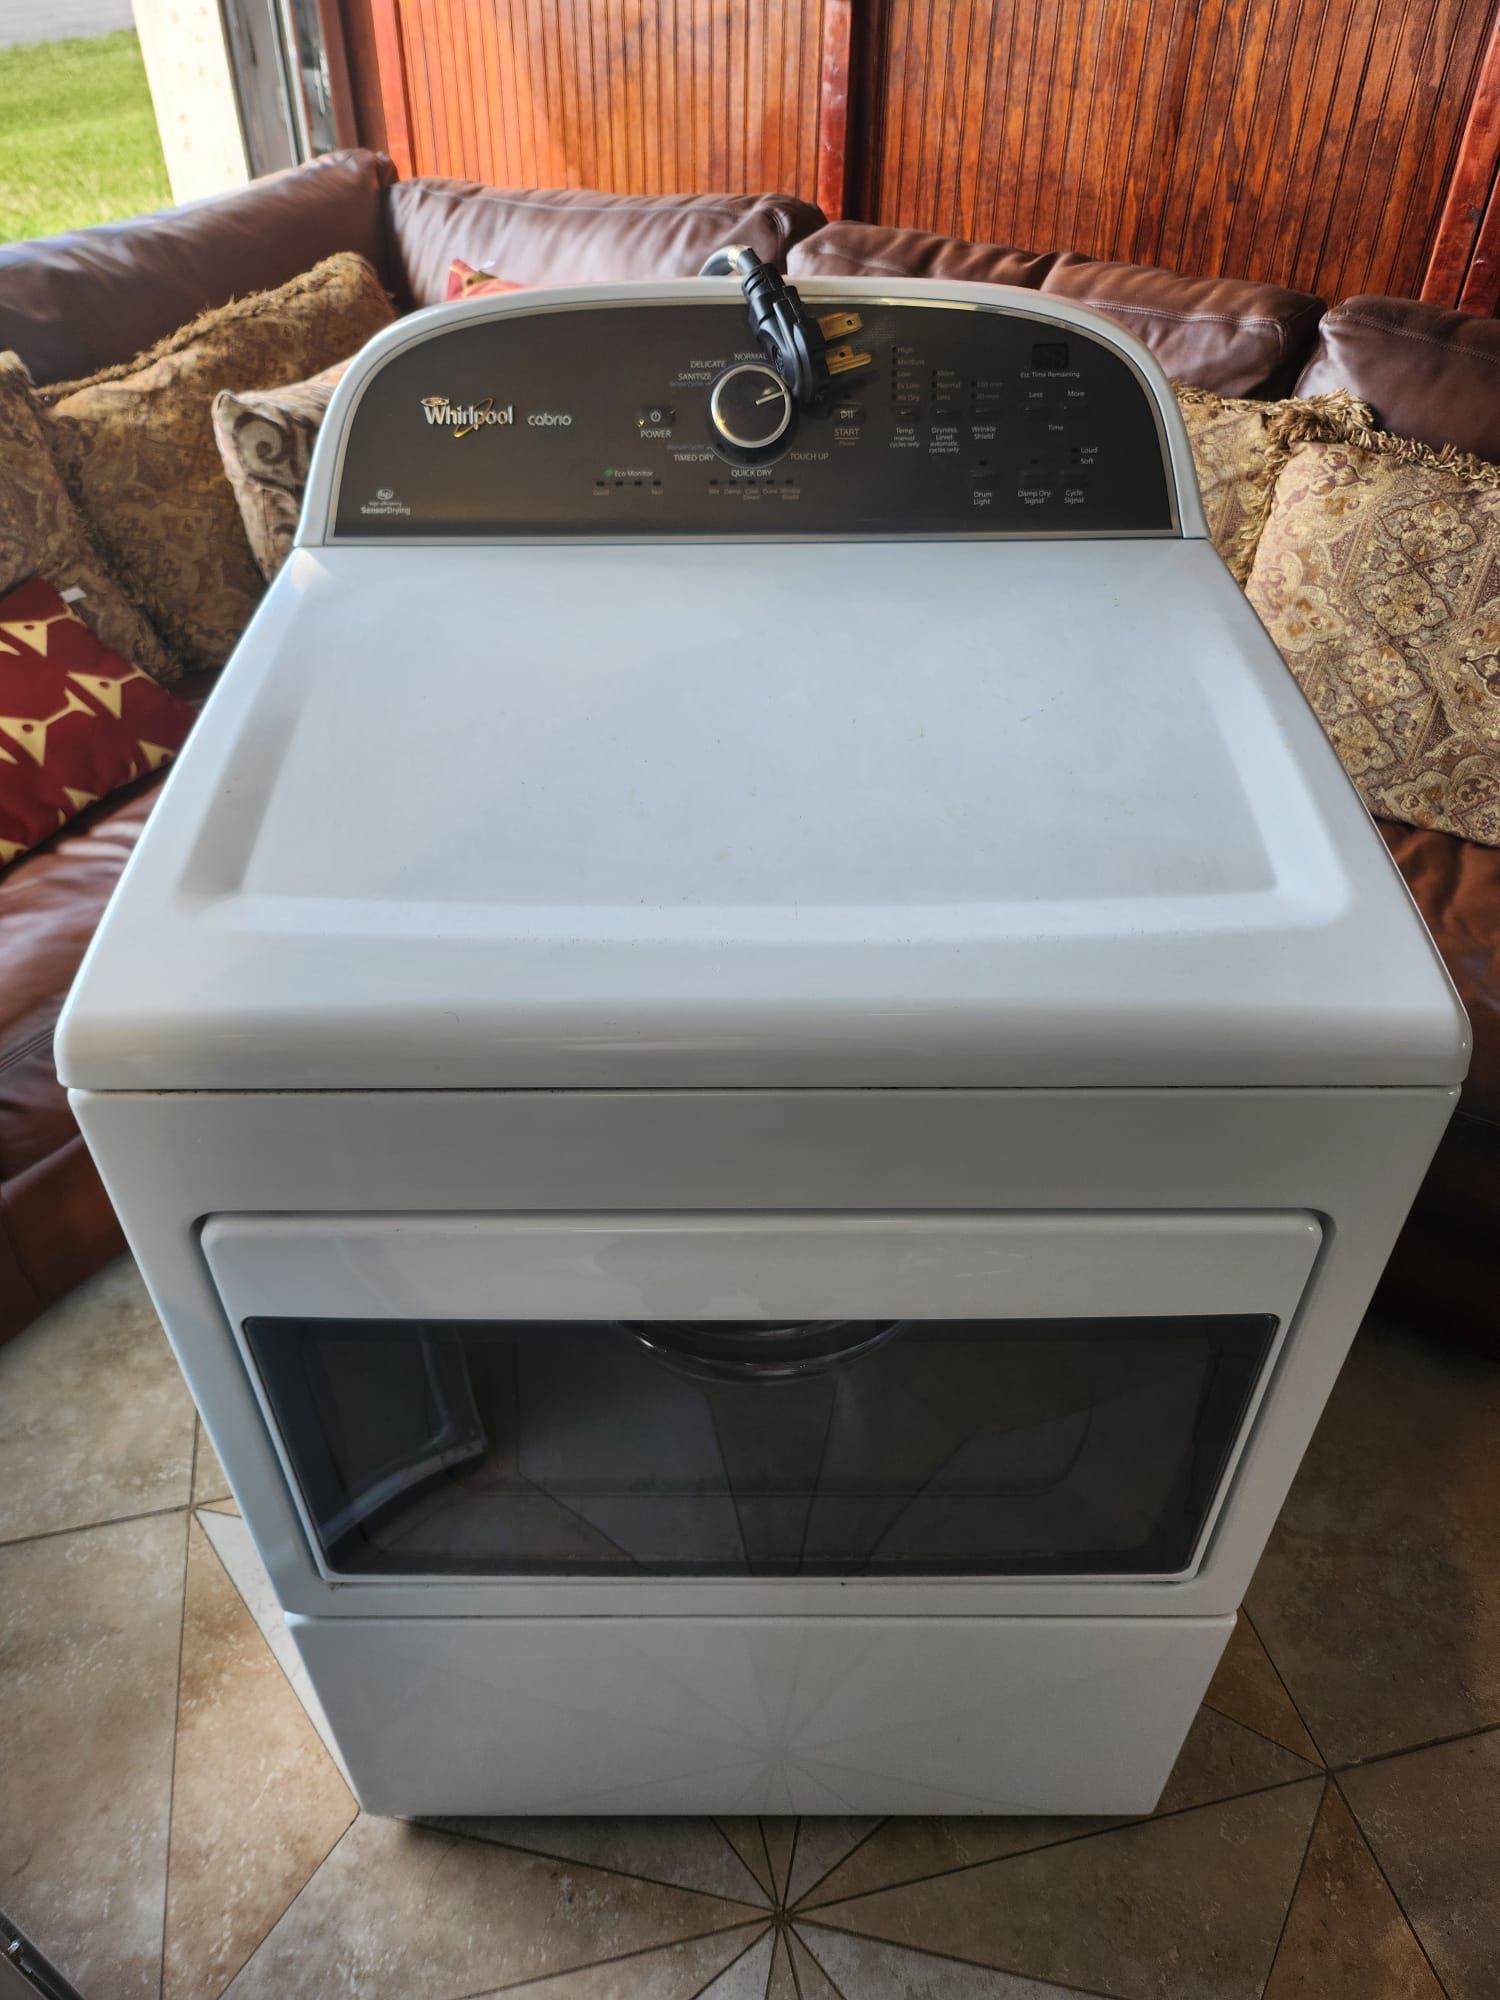 Whirlpool washer And Dryers